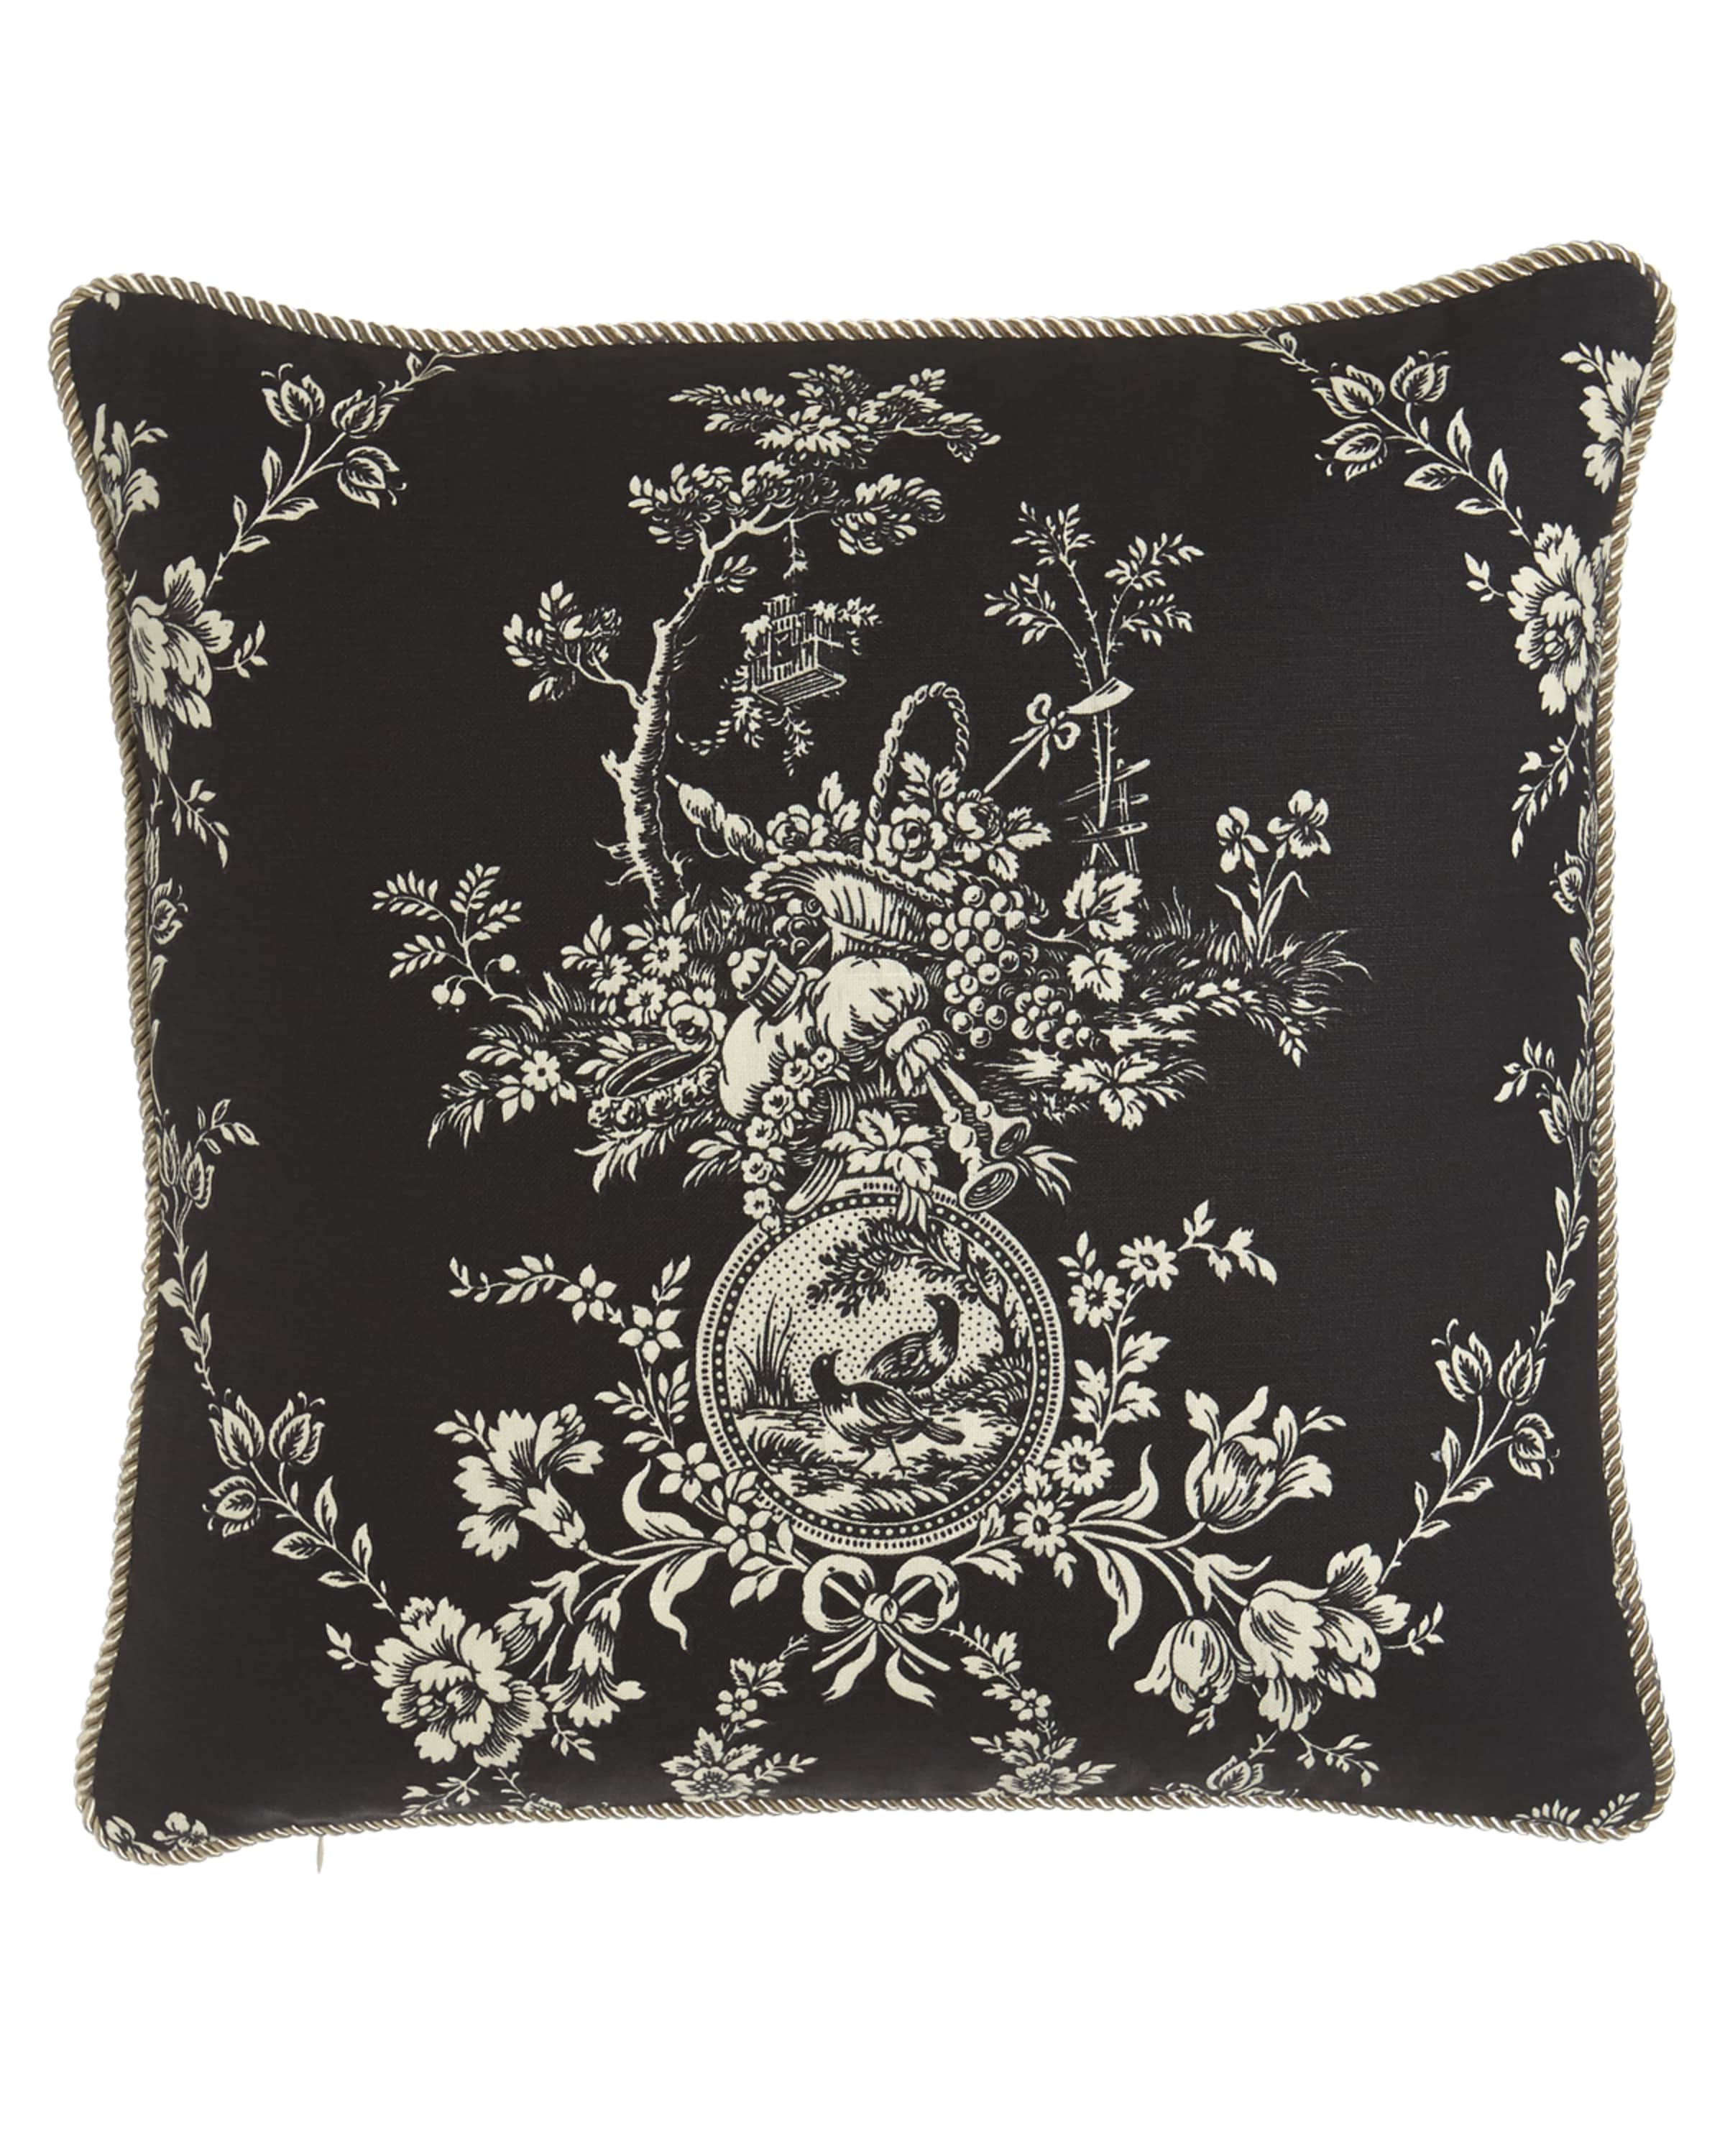 Sherry Kline Home "French Toile" Pillow, 20"Sq.